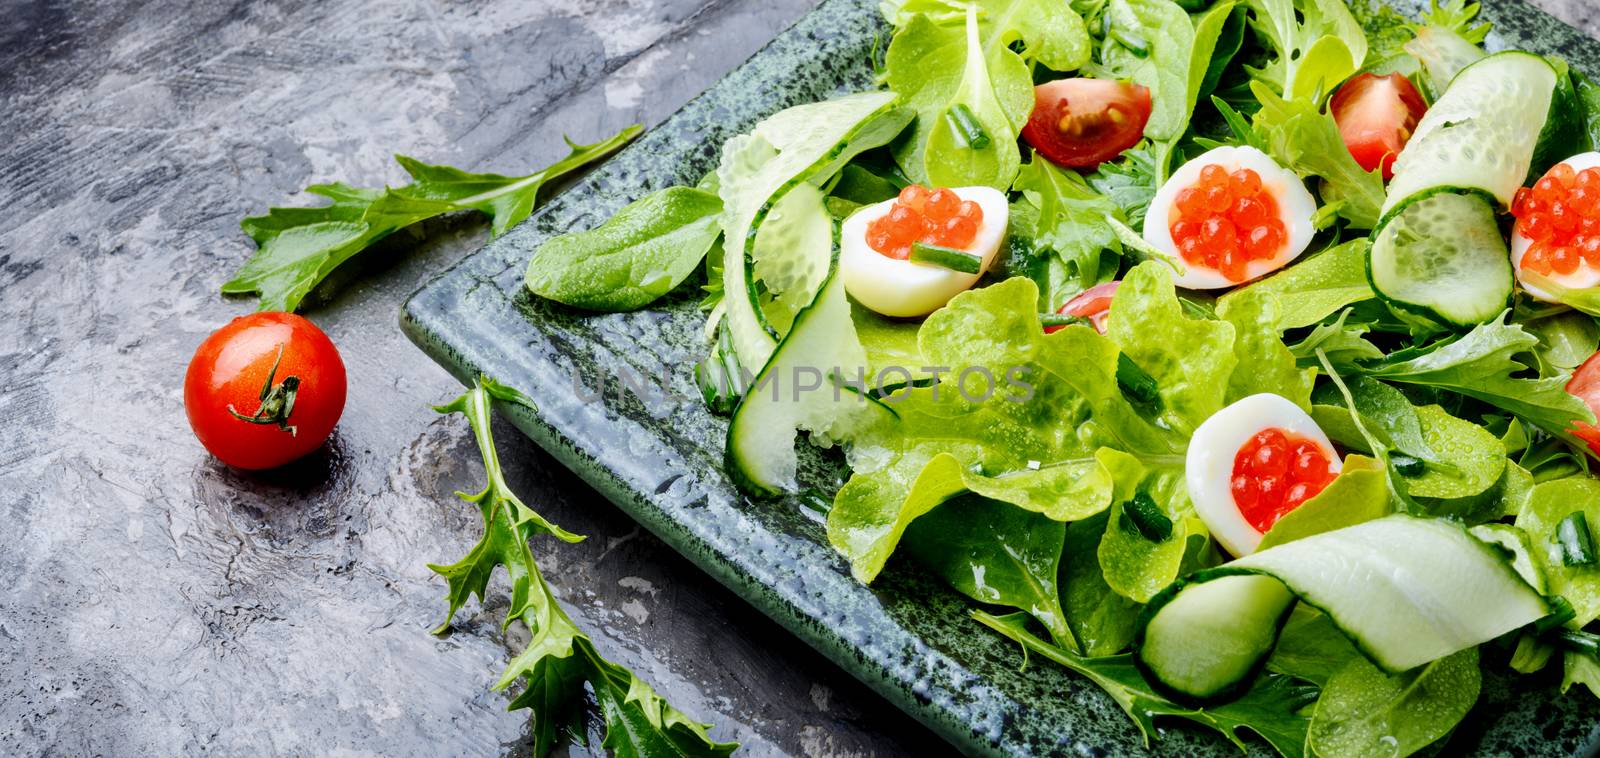 Salad with vegetables and greens by LMykola